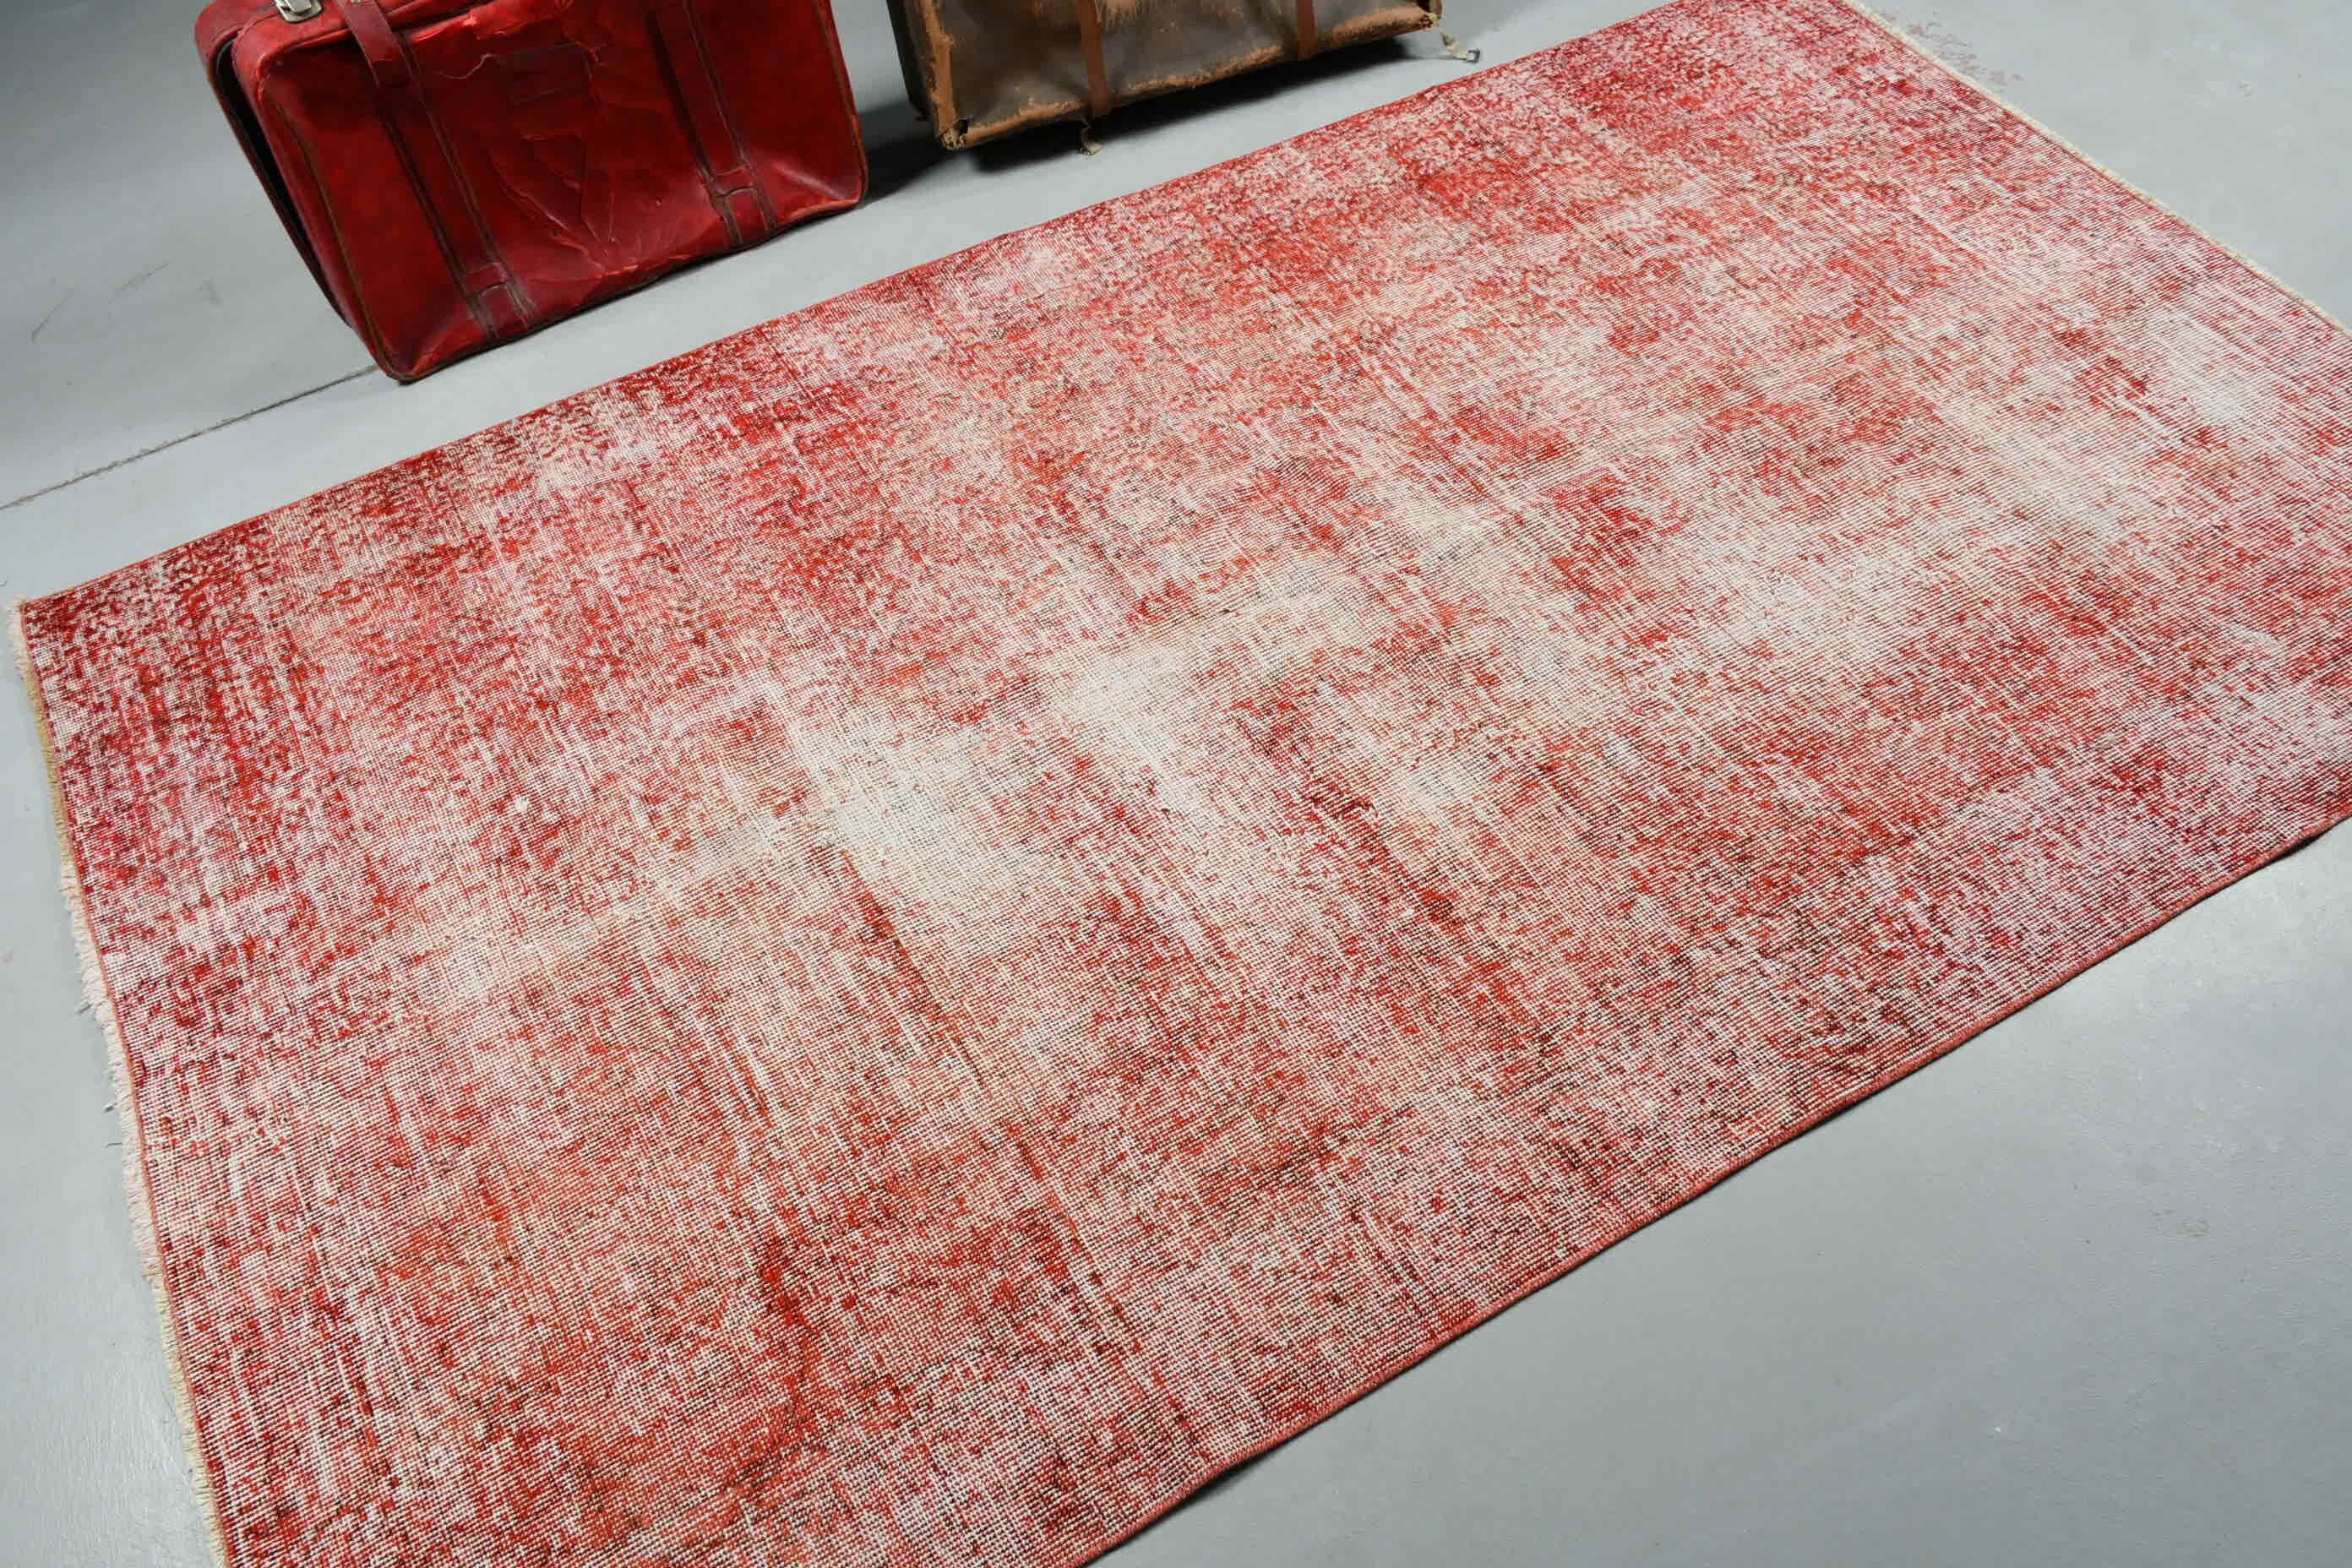 Red Moroccan Rugs, Vintage Rug, Vintage Decor Rug, Rugs for Area, Kitchen Rugs, Turkish Rug, Floor Rug, 4.7x7.5 ft Area Rug, Antique Rugs